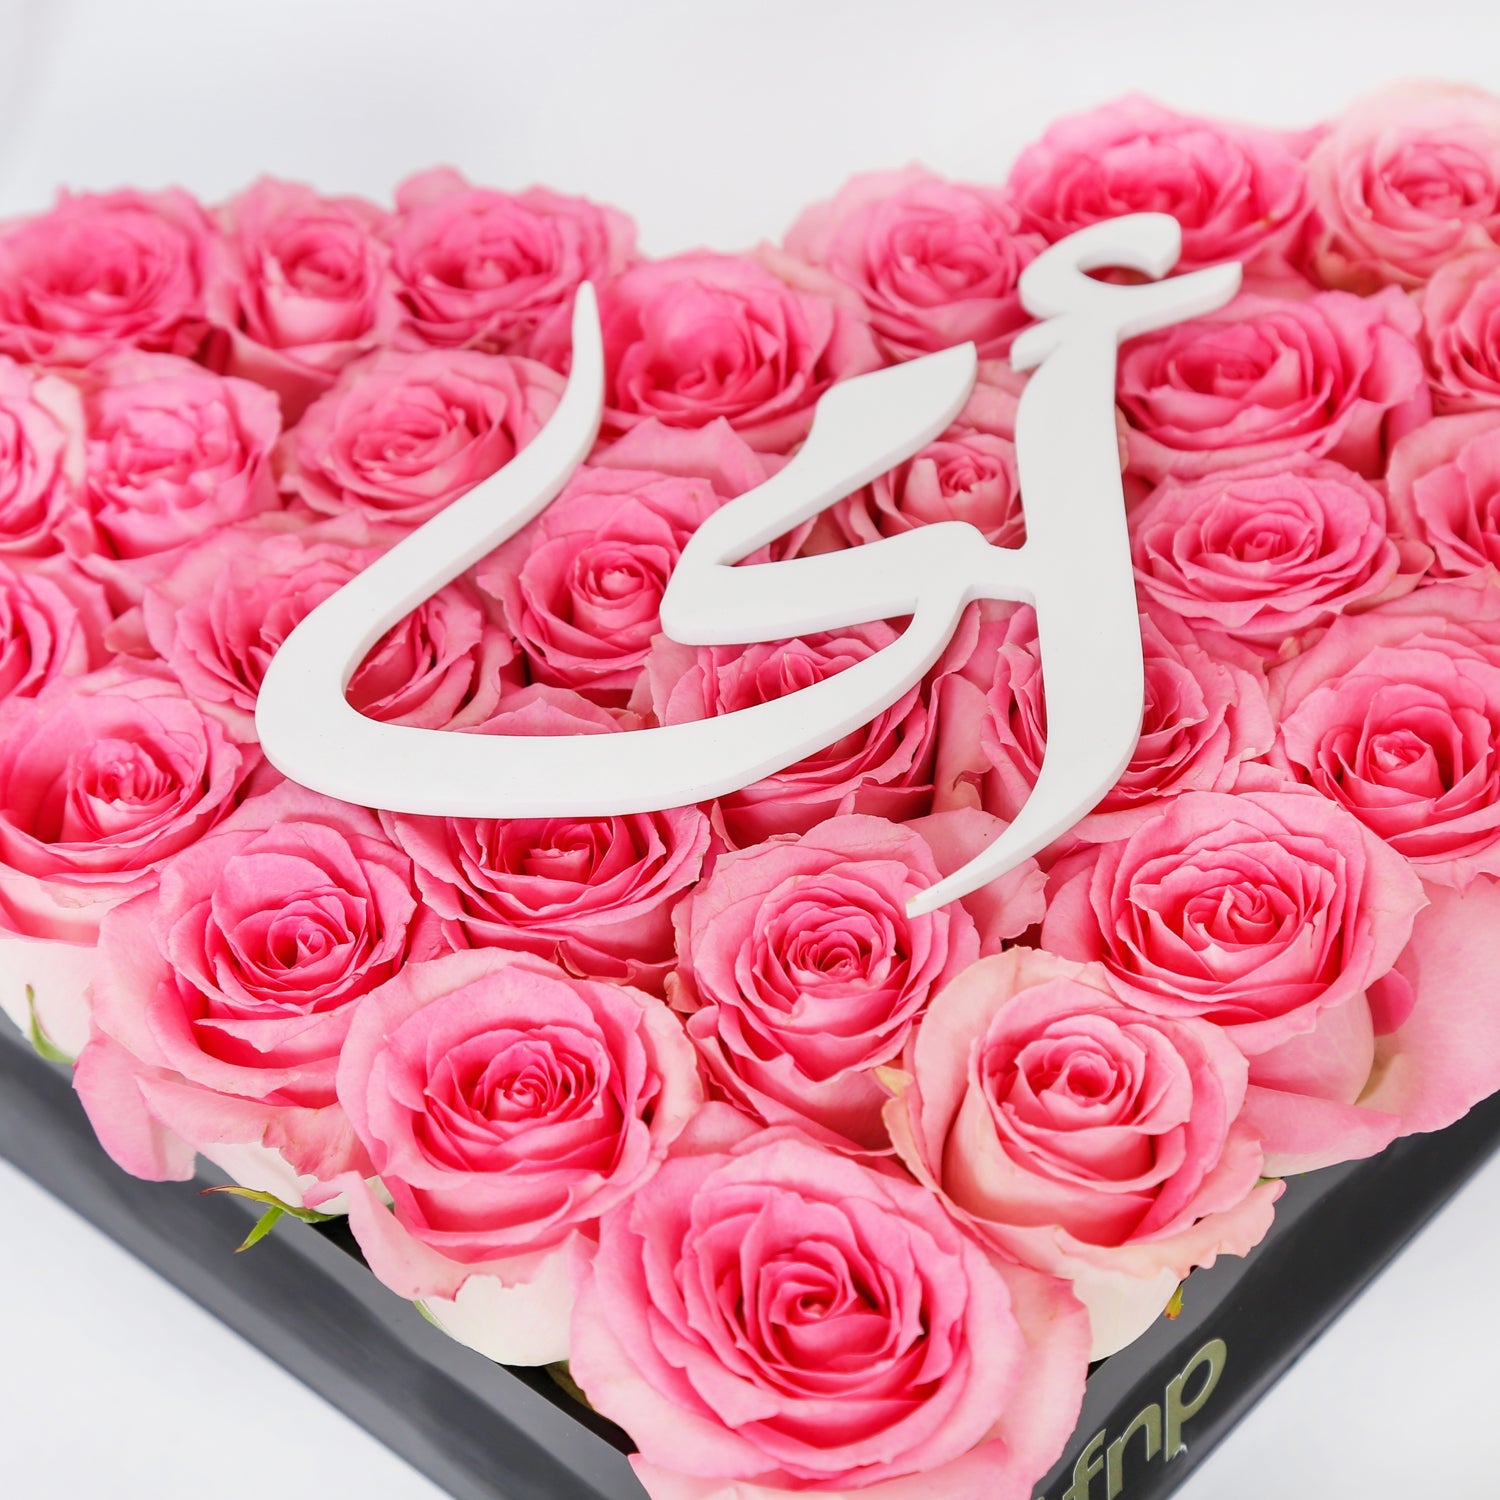 Pink Roses in Heart Shape Box for Mom